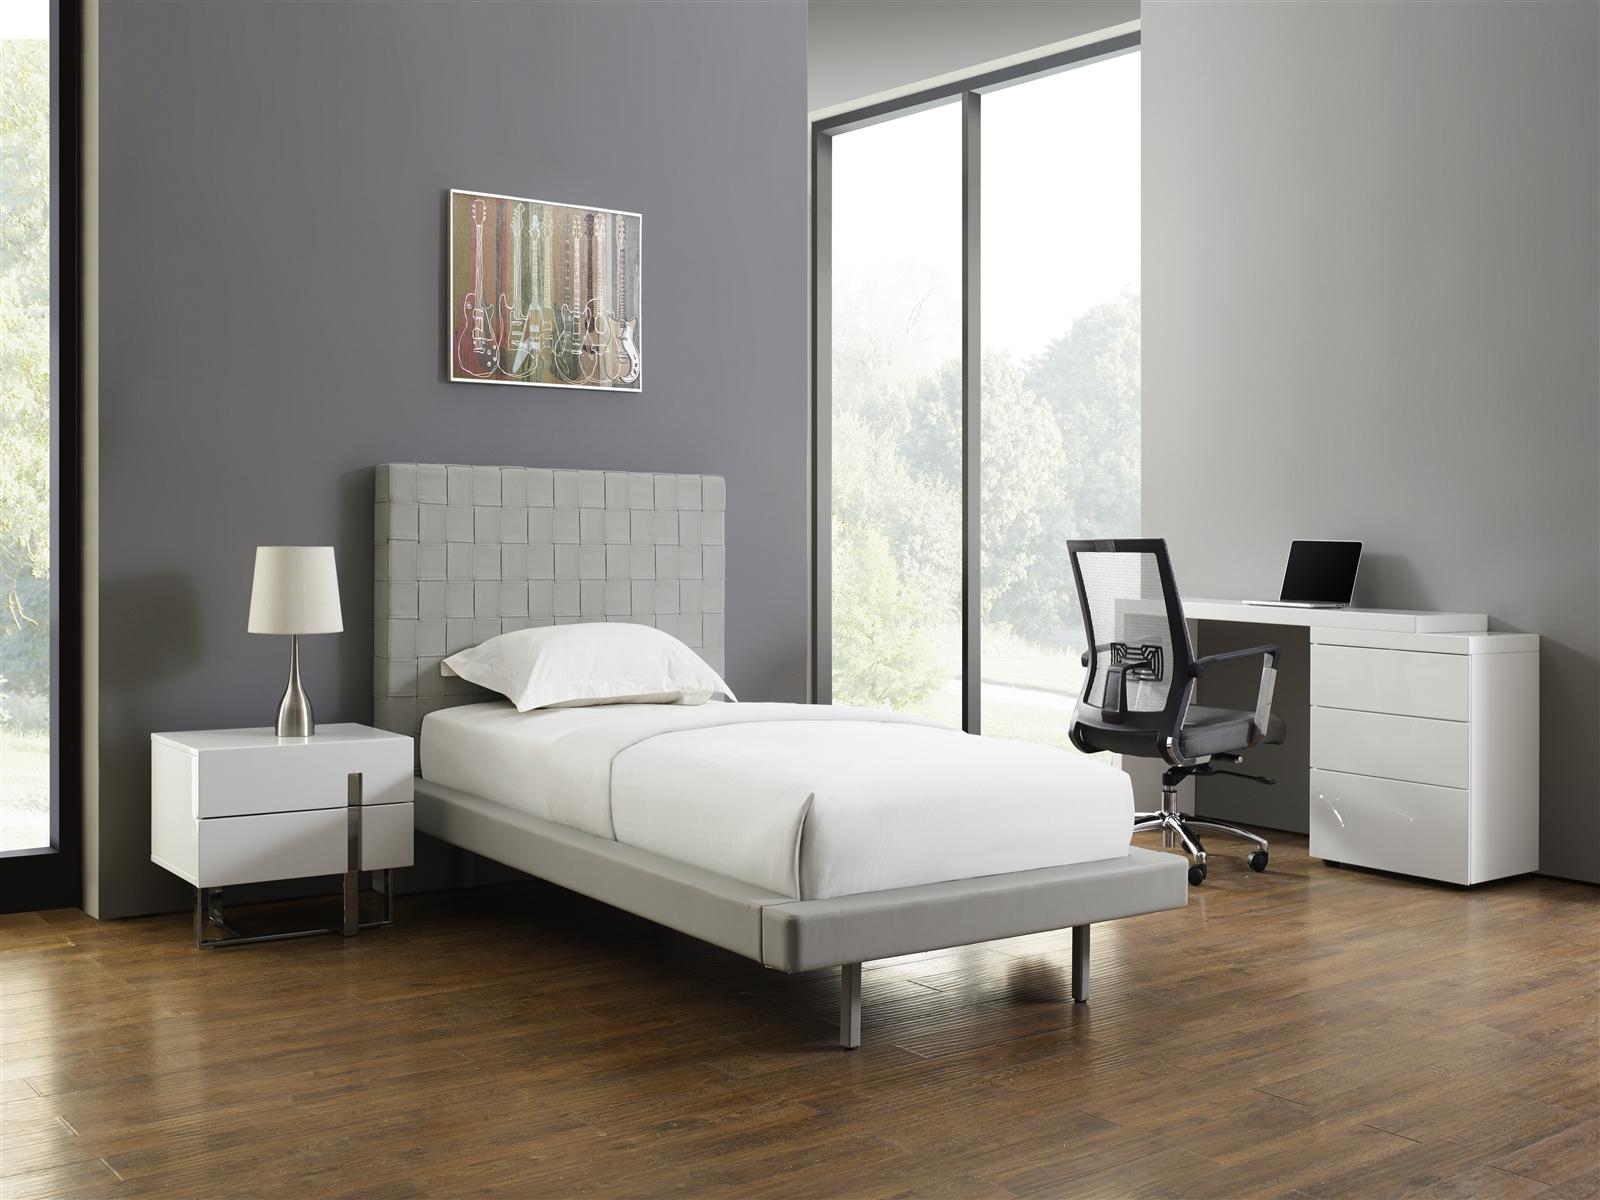 Contemporary, Modern Platform Bed ZACK CB-C1301-TG in Light Gray Eco Leather